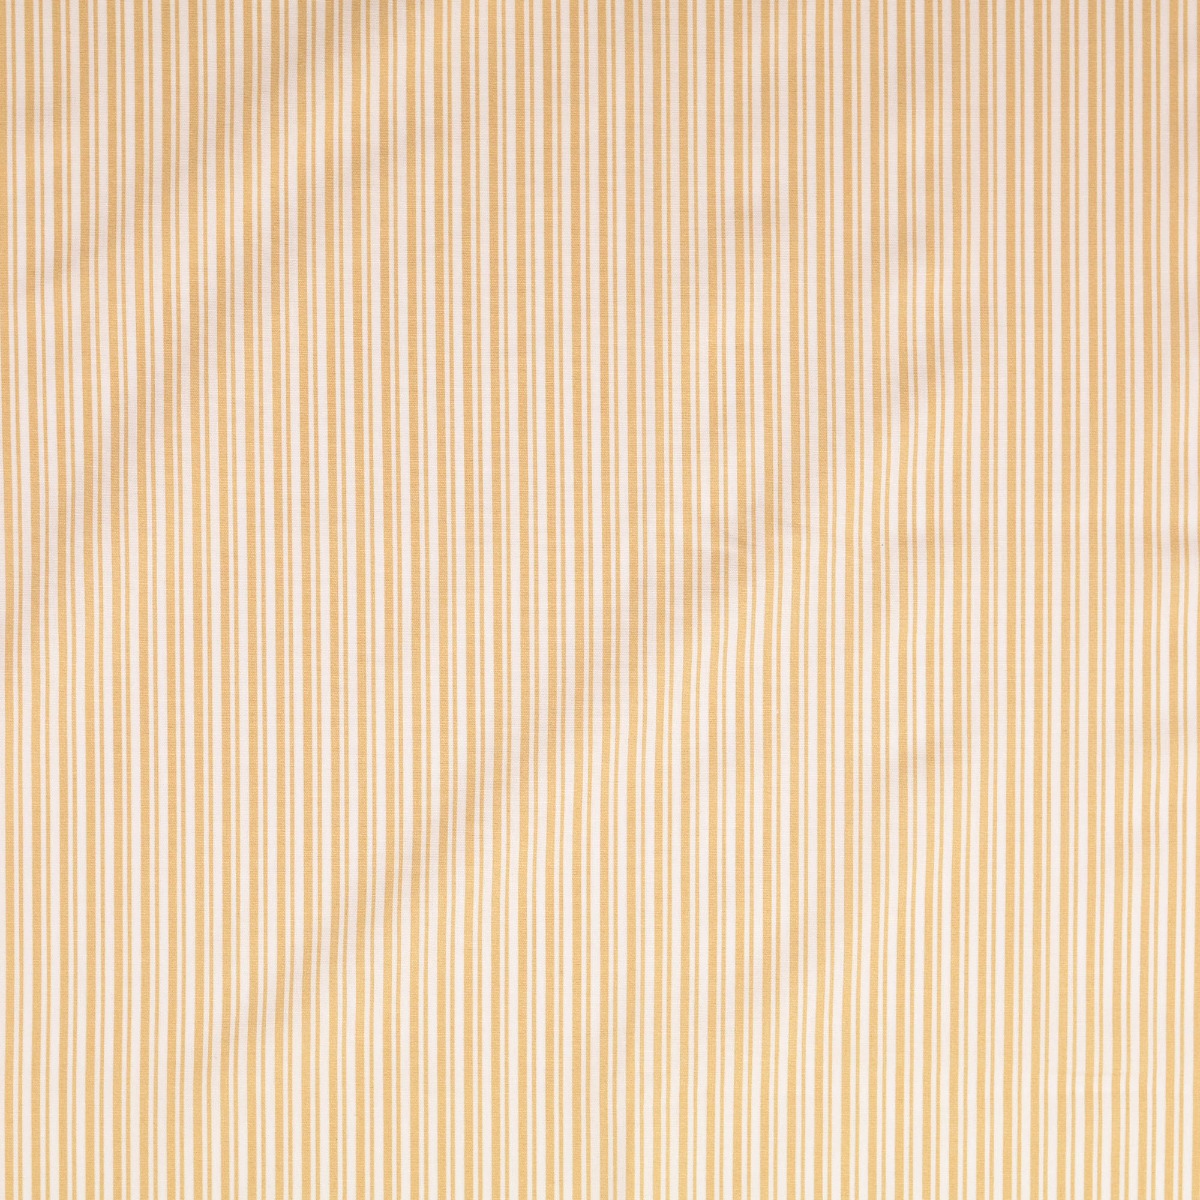 Baumwolle Darling Double Stripes Sand